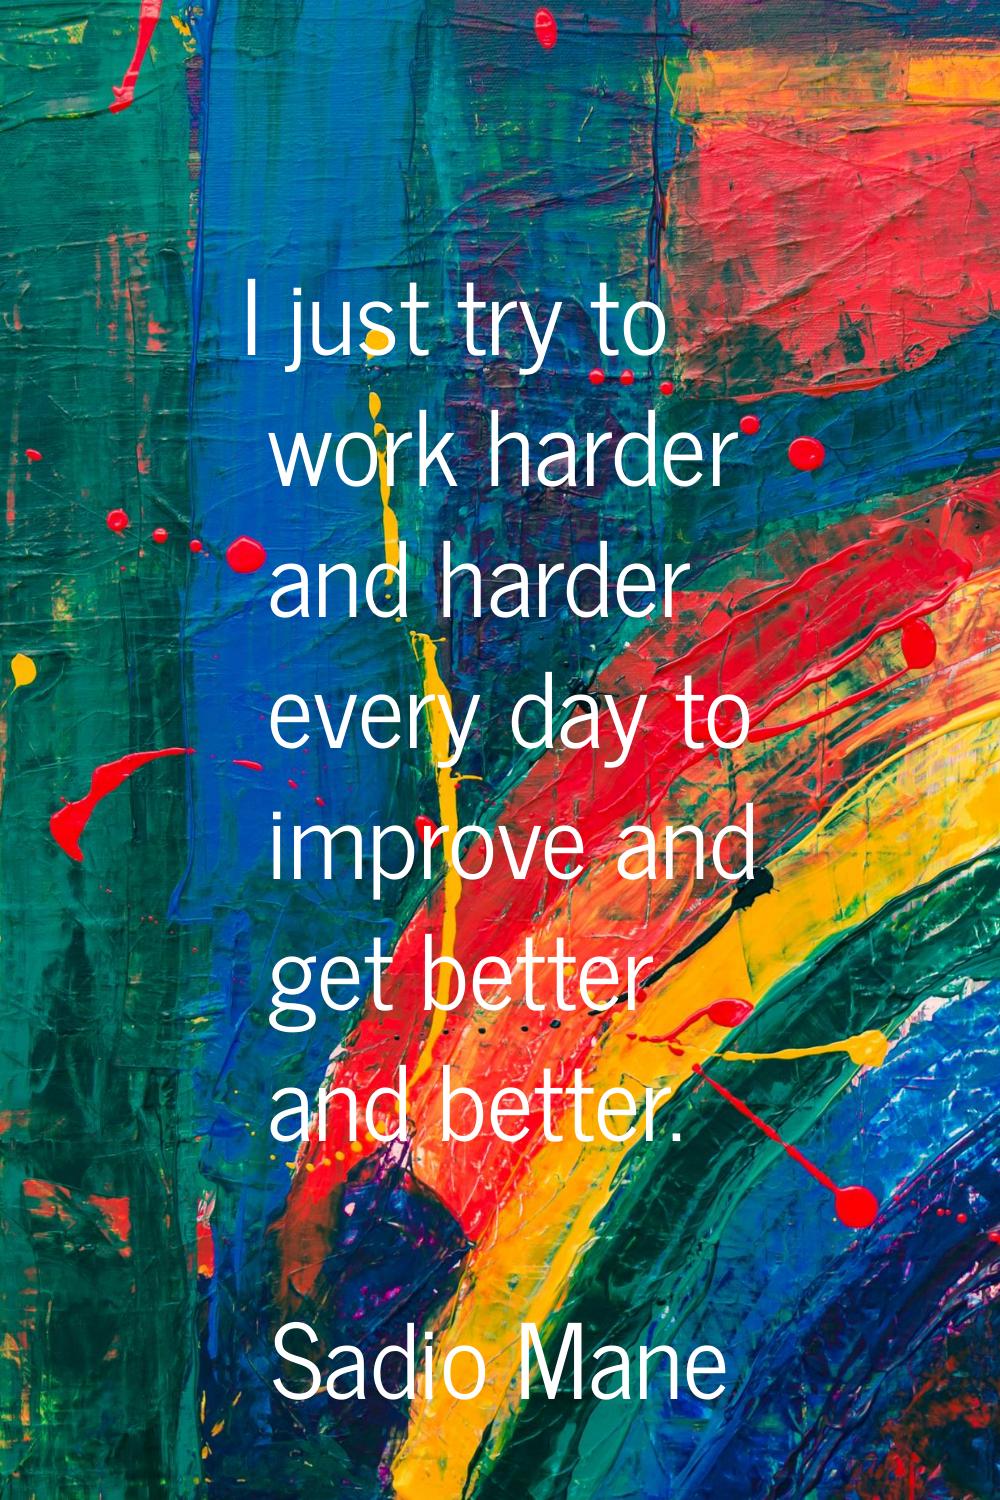 I just try to work harder and harder every day to improve and get better and better.